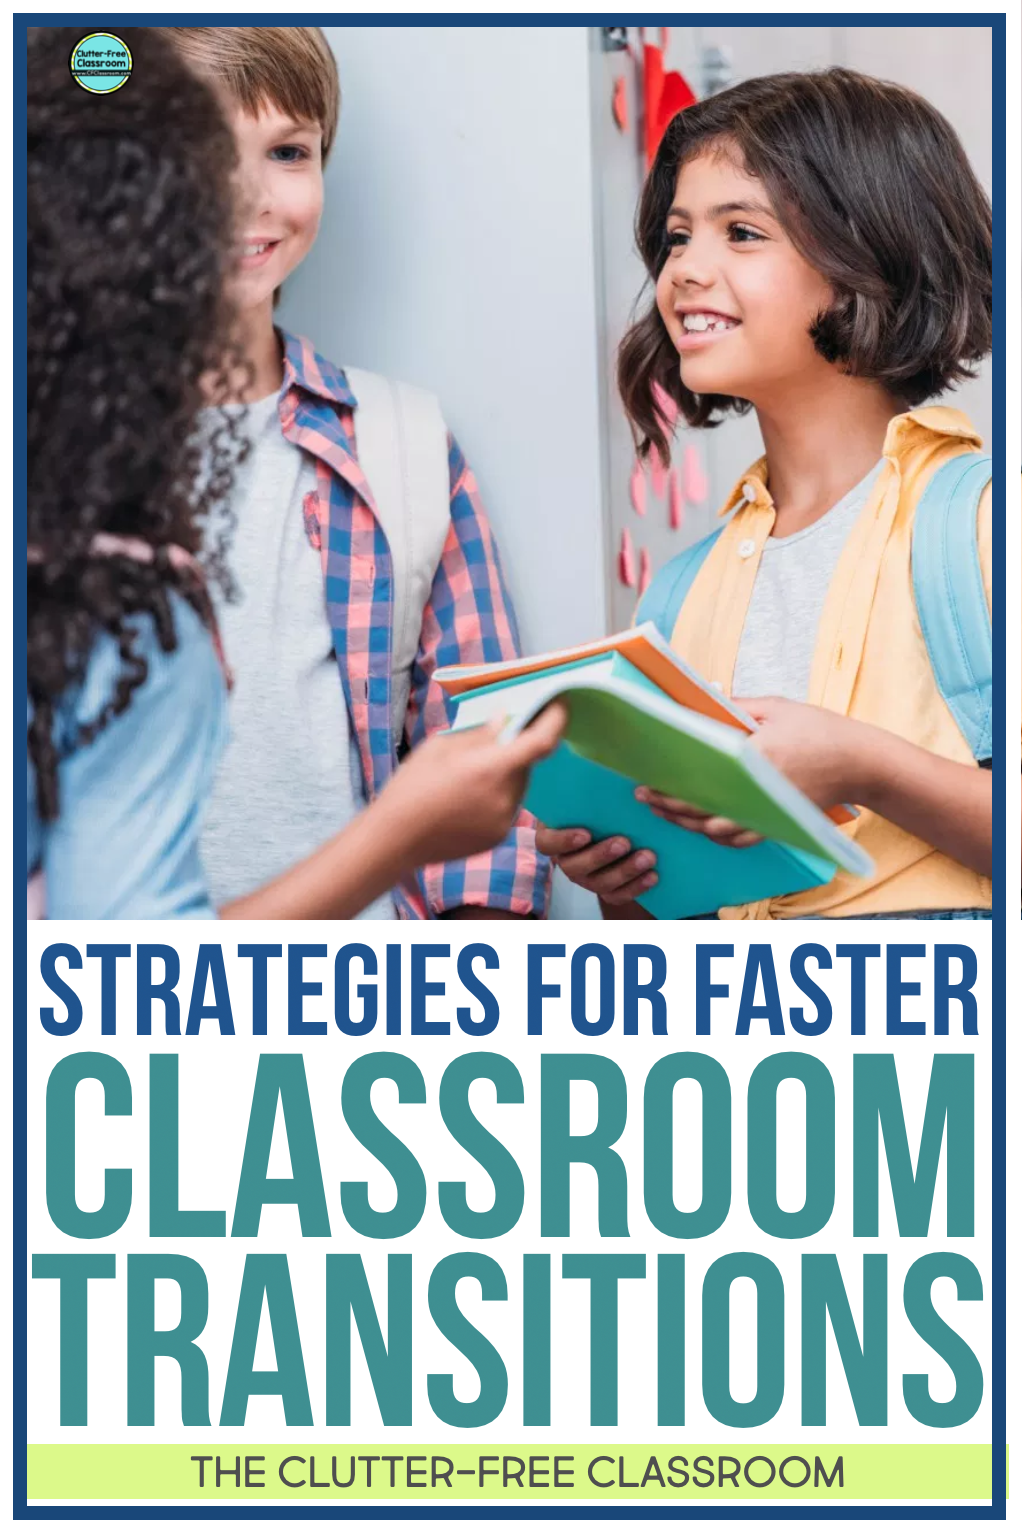 Check out these fun and easy classroom management tips and strategies for quick classroom transitions from the Clutter Free Classroom. Teachers and students will love teaching and learning these songs, procedures, and routines.